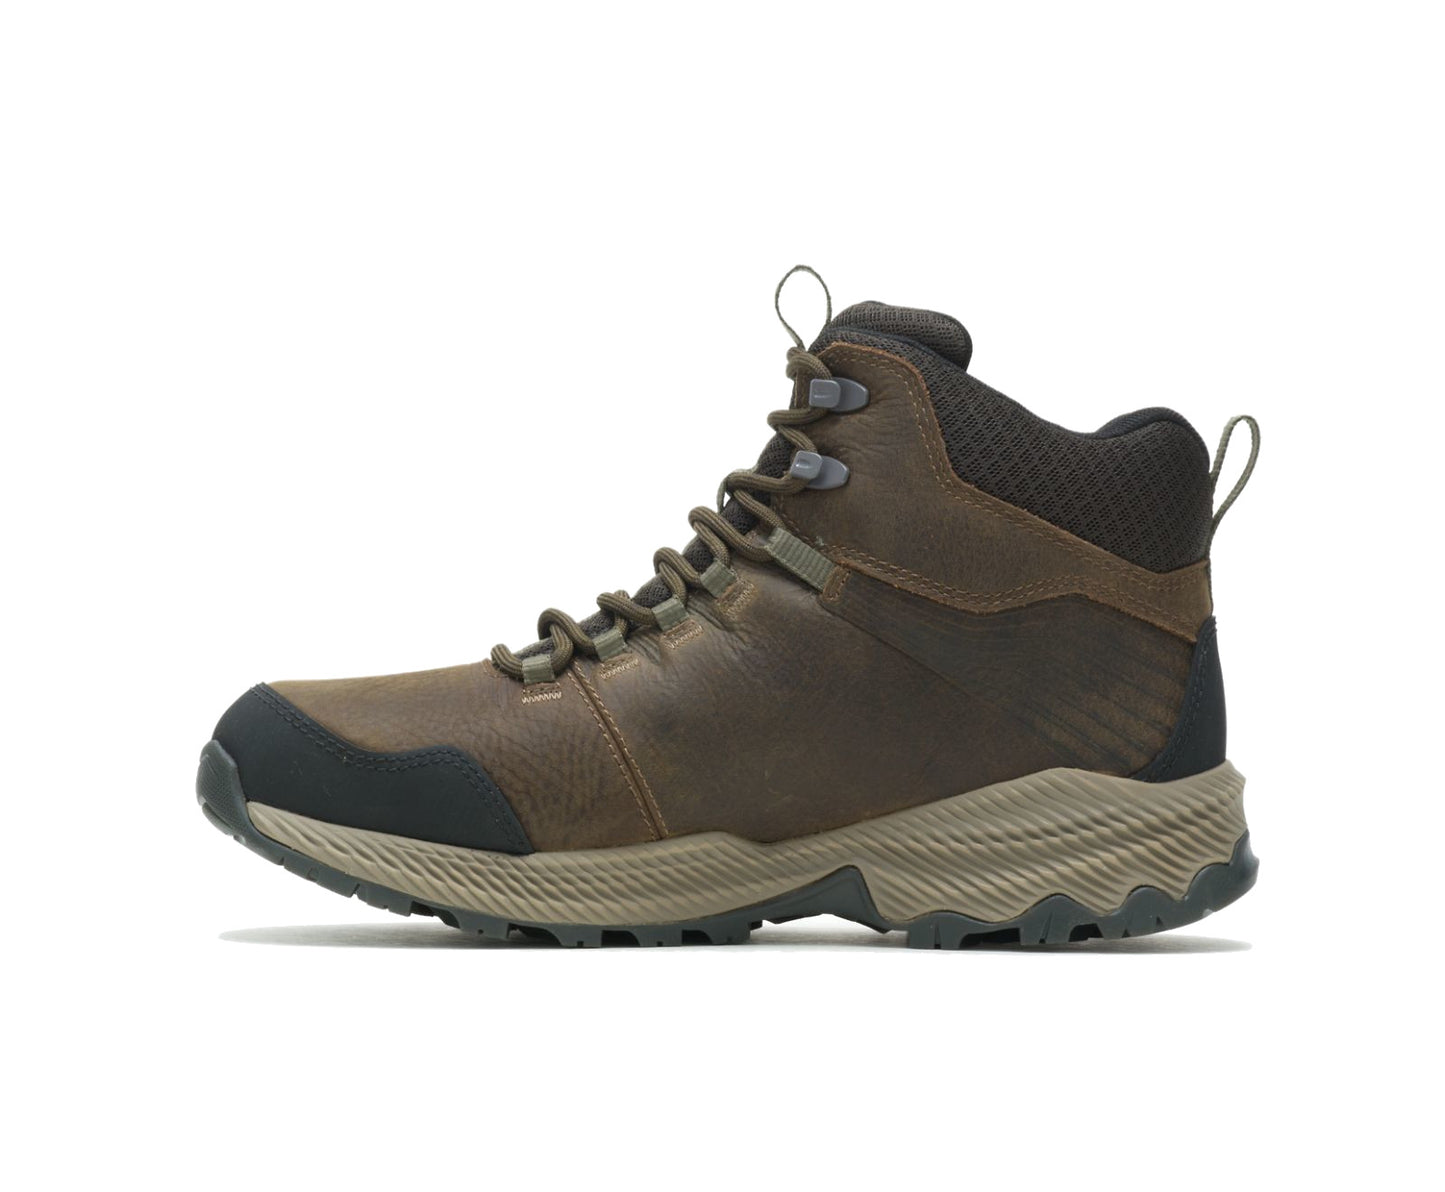 Merrell Men's Forestbound Mid Waterproof - Cloudy